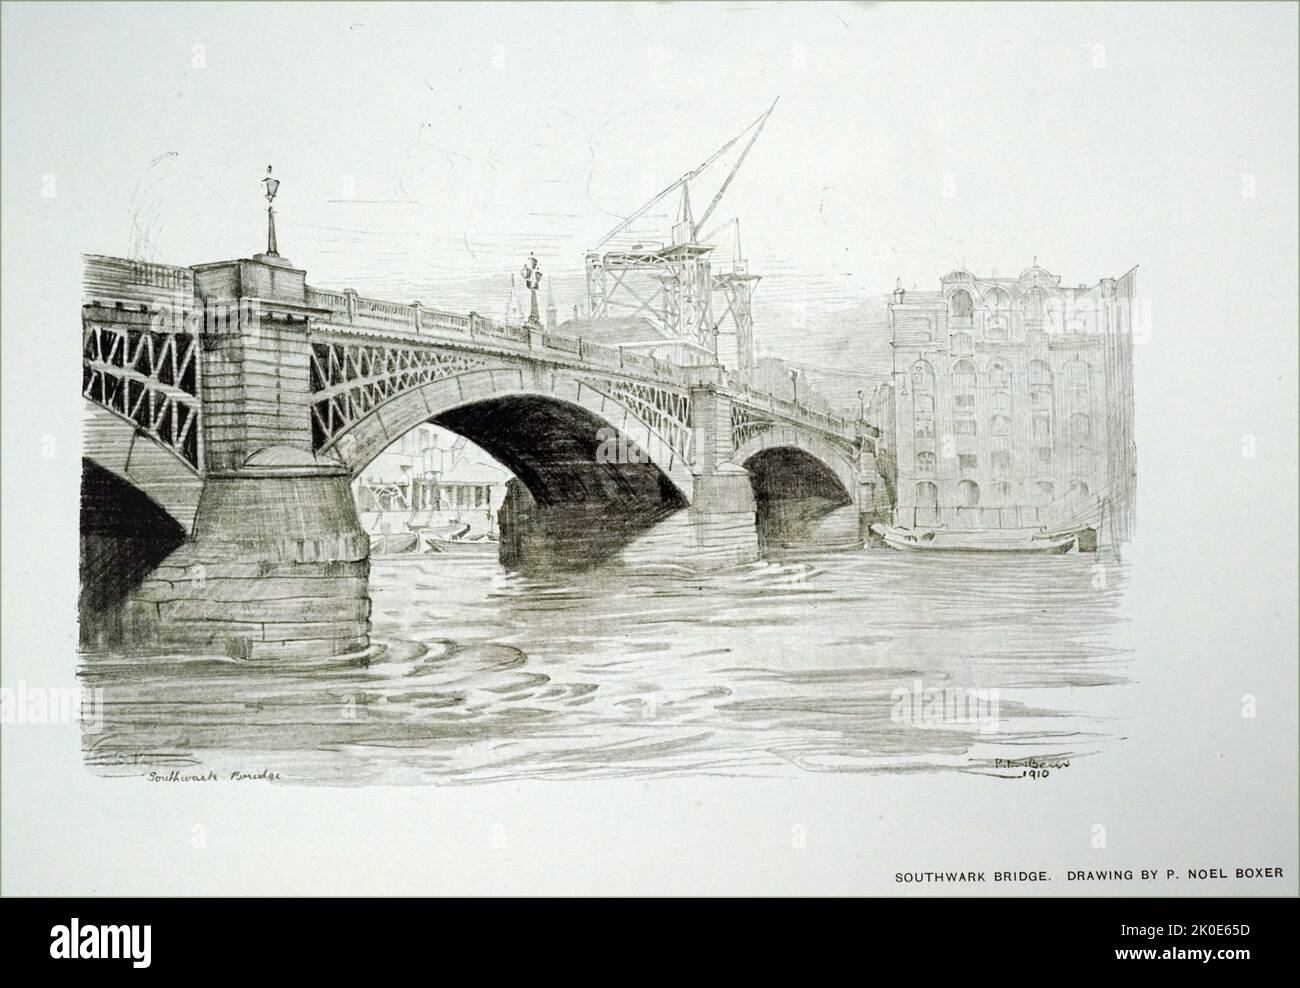 Southwark Bridge by Percy Noel Boxer. Drawing, inscribed with signature, title, and dated 1910. Stock Photo